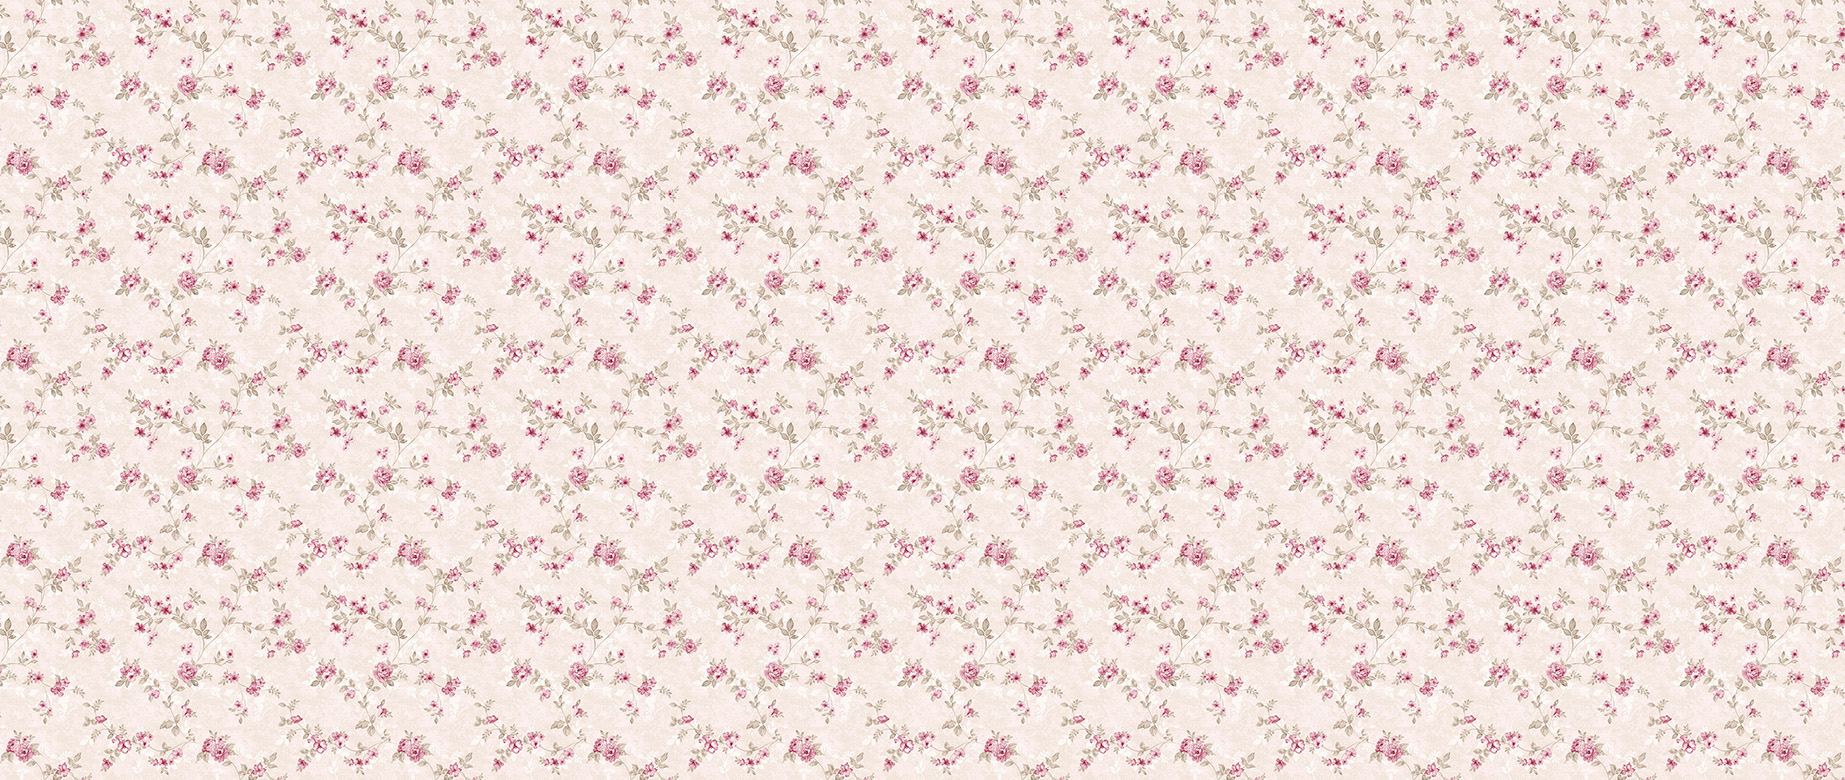 peach-small-elegant-floral-pattern-wallpapers-full-wide-view